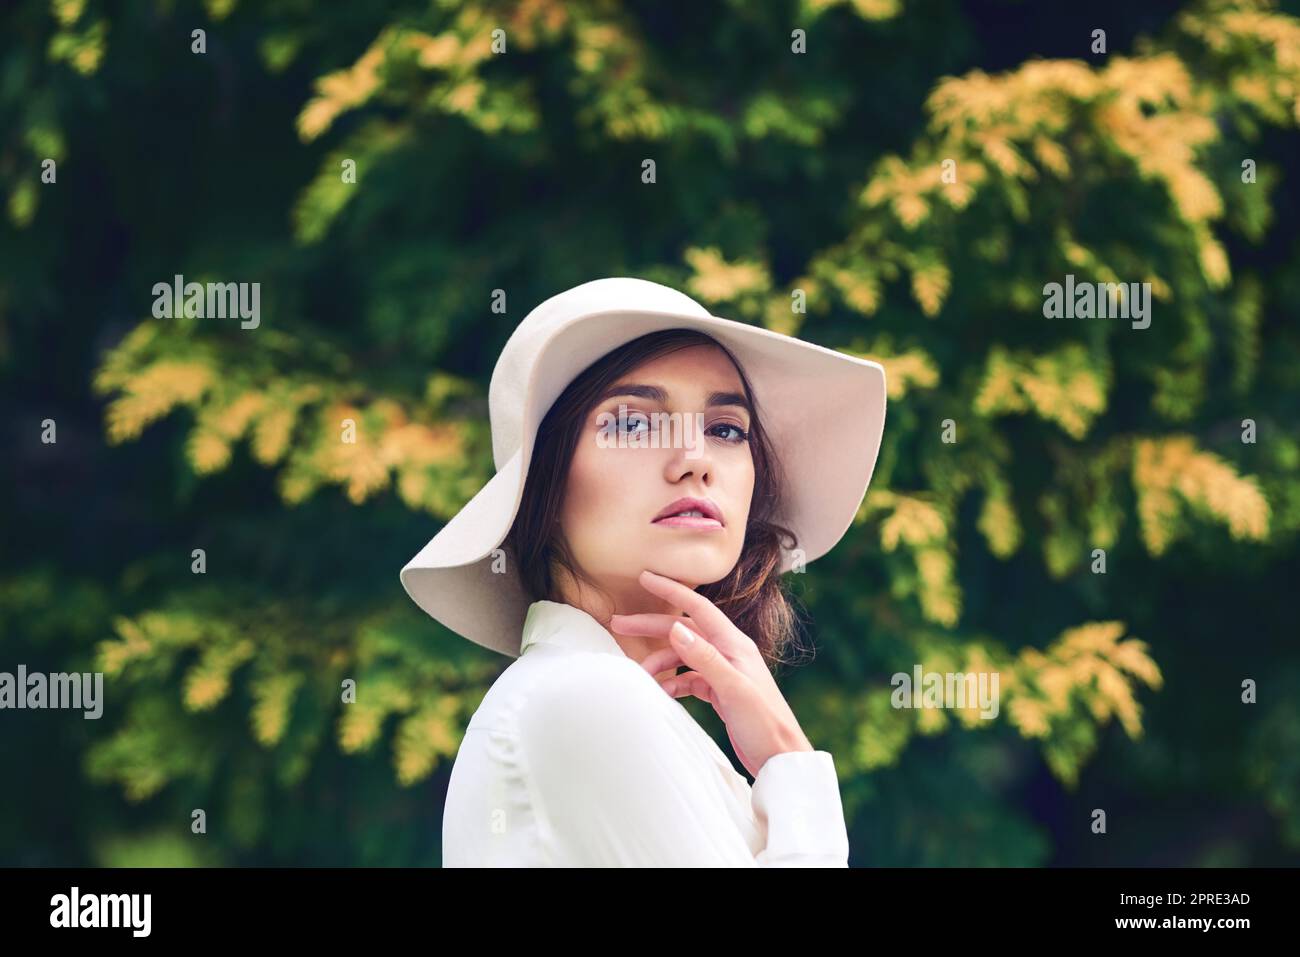 Beauty so enchanting. Portrait of an attractive young woman wearing a stylish hat outdoors. Stock Photo